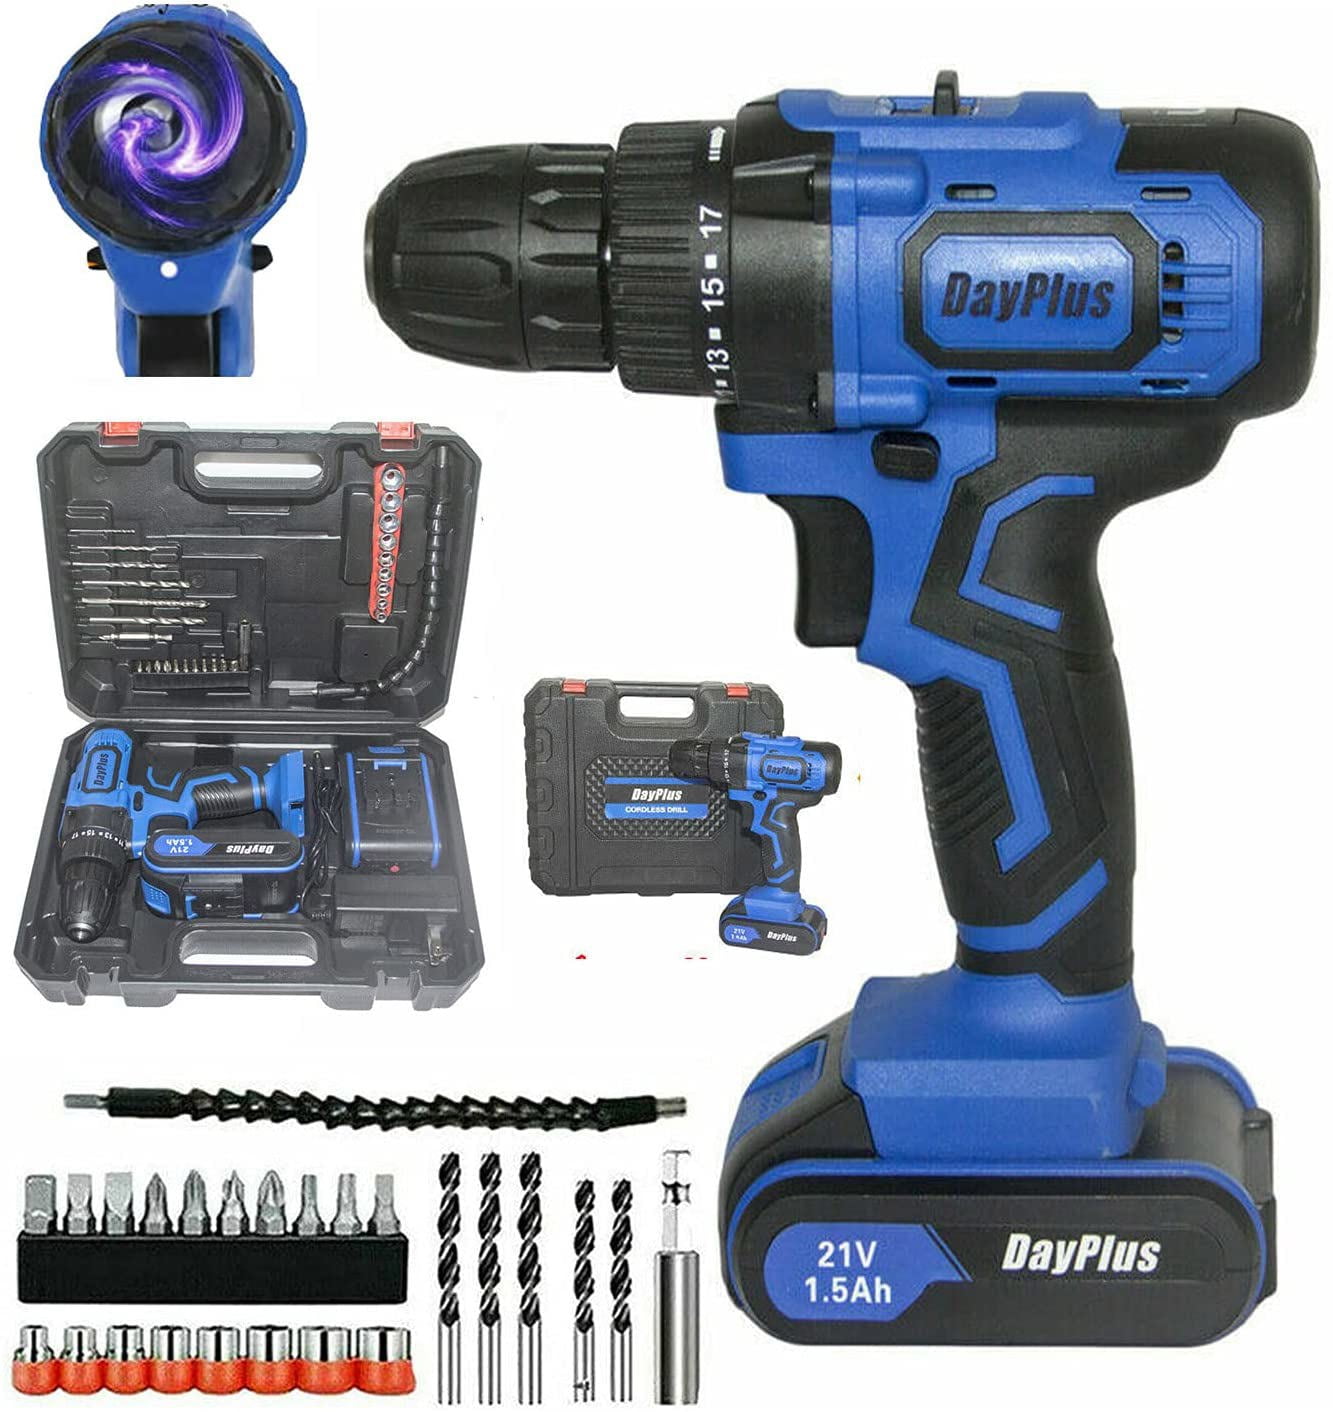 Heavy Duty 21V Cordless Drill 1500mAh Fast Charger 18+1 Torque Screwdeiver 29PC 